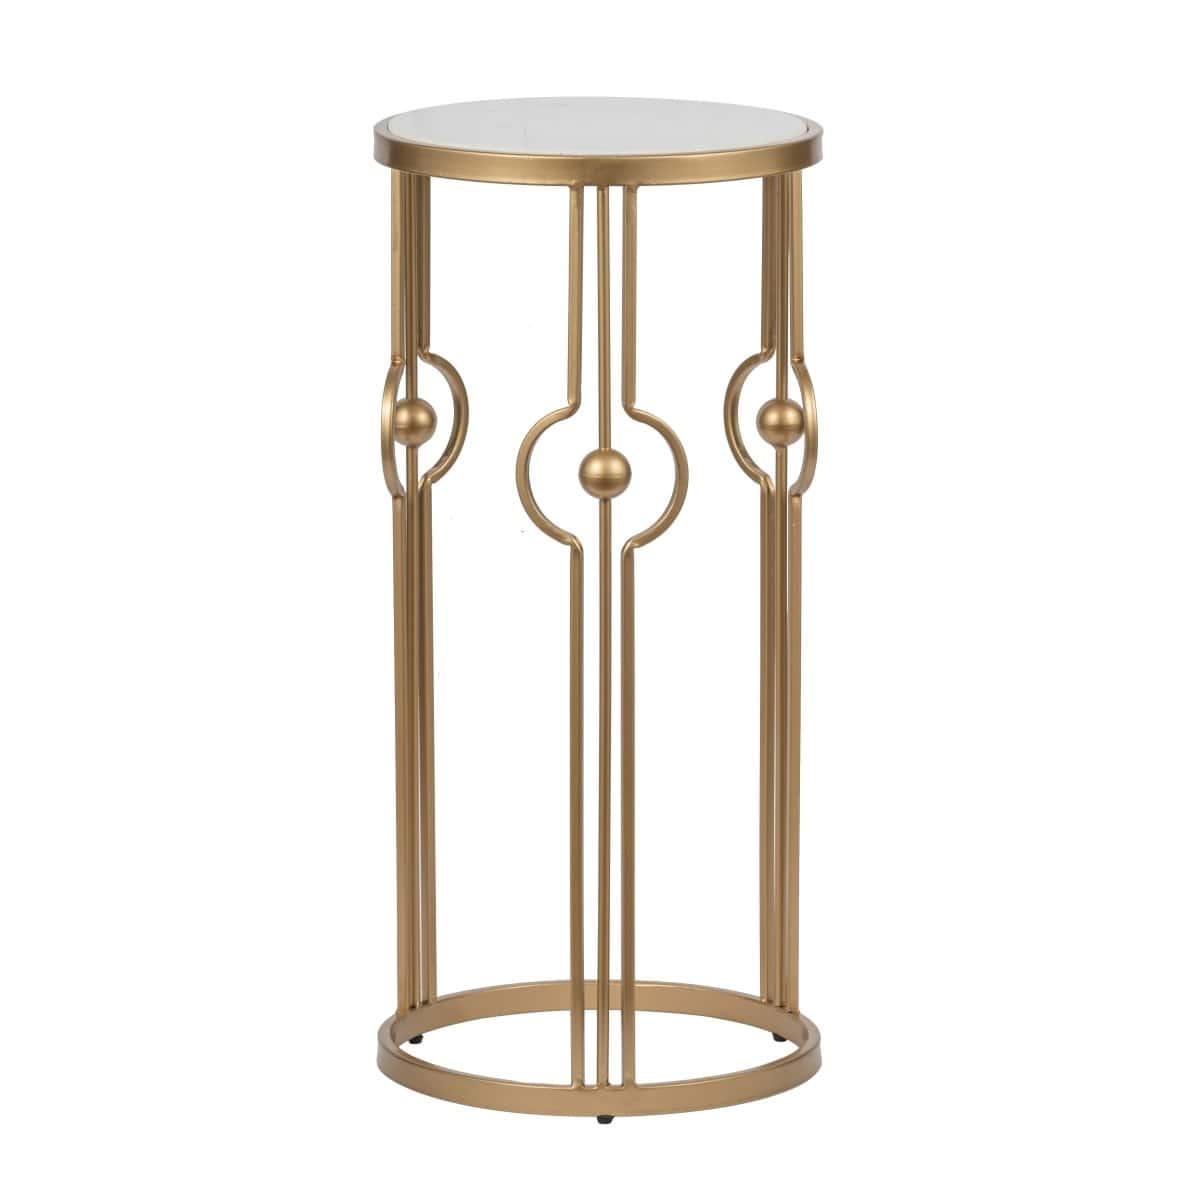 Marble and Brass Table AB-AV44588-DS picket and rail